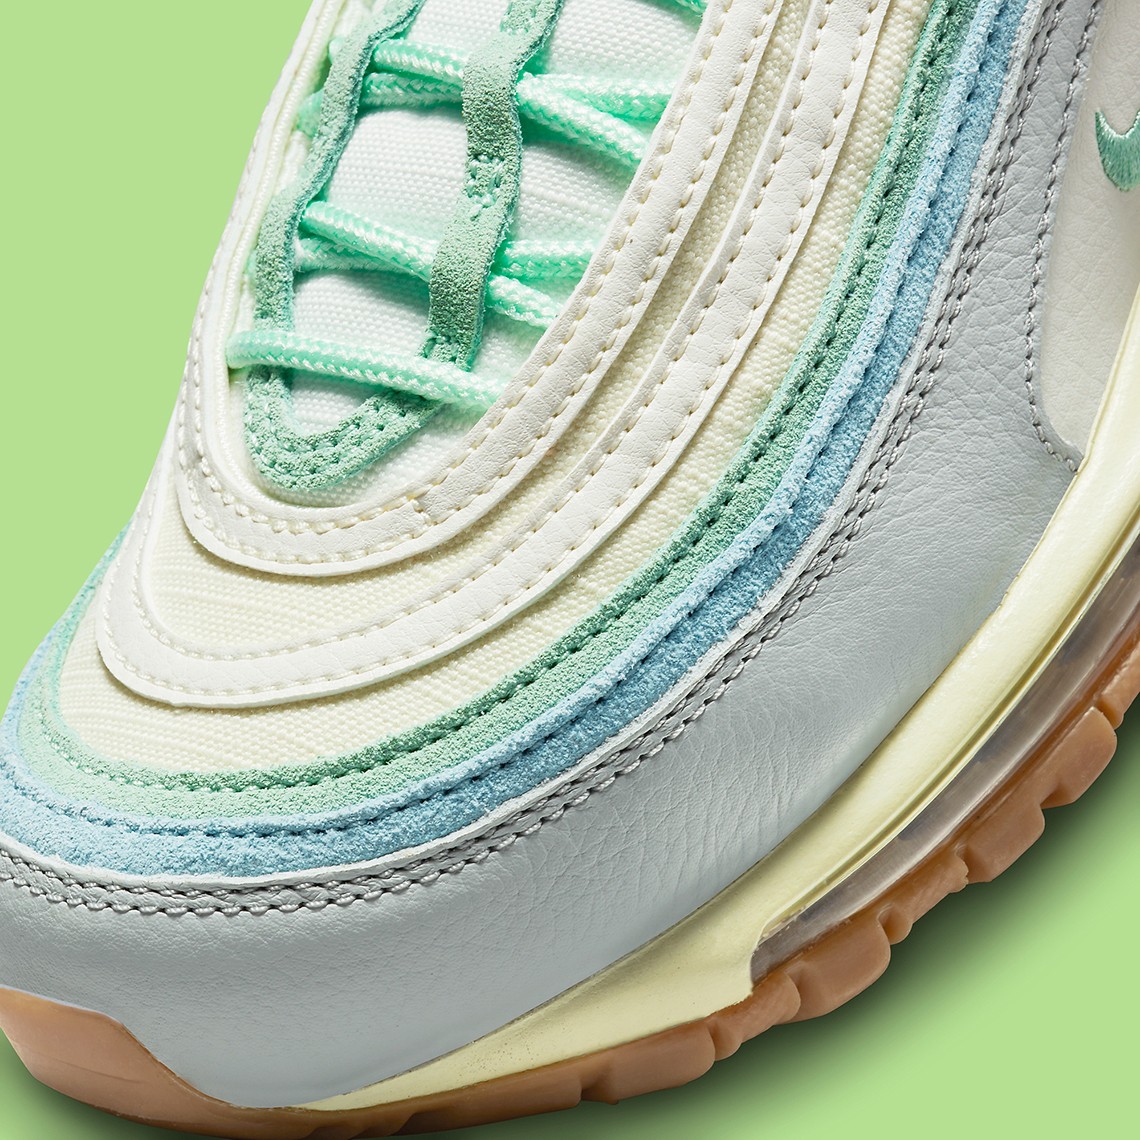 Nike Air Max 97 Certified Fresh Dx5766 131 Release Date 1